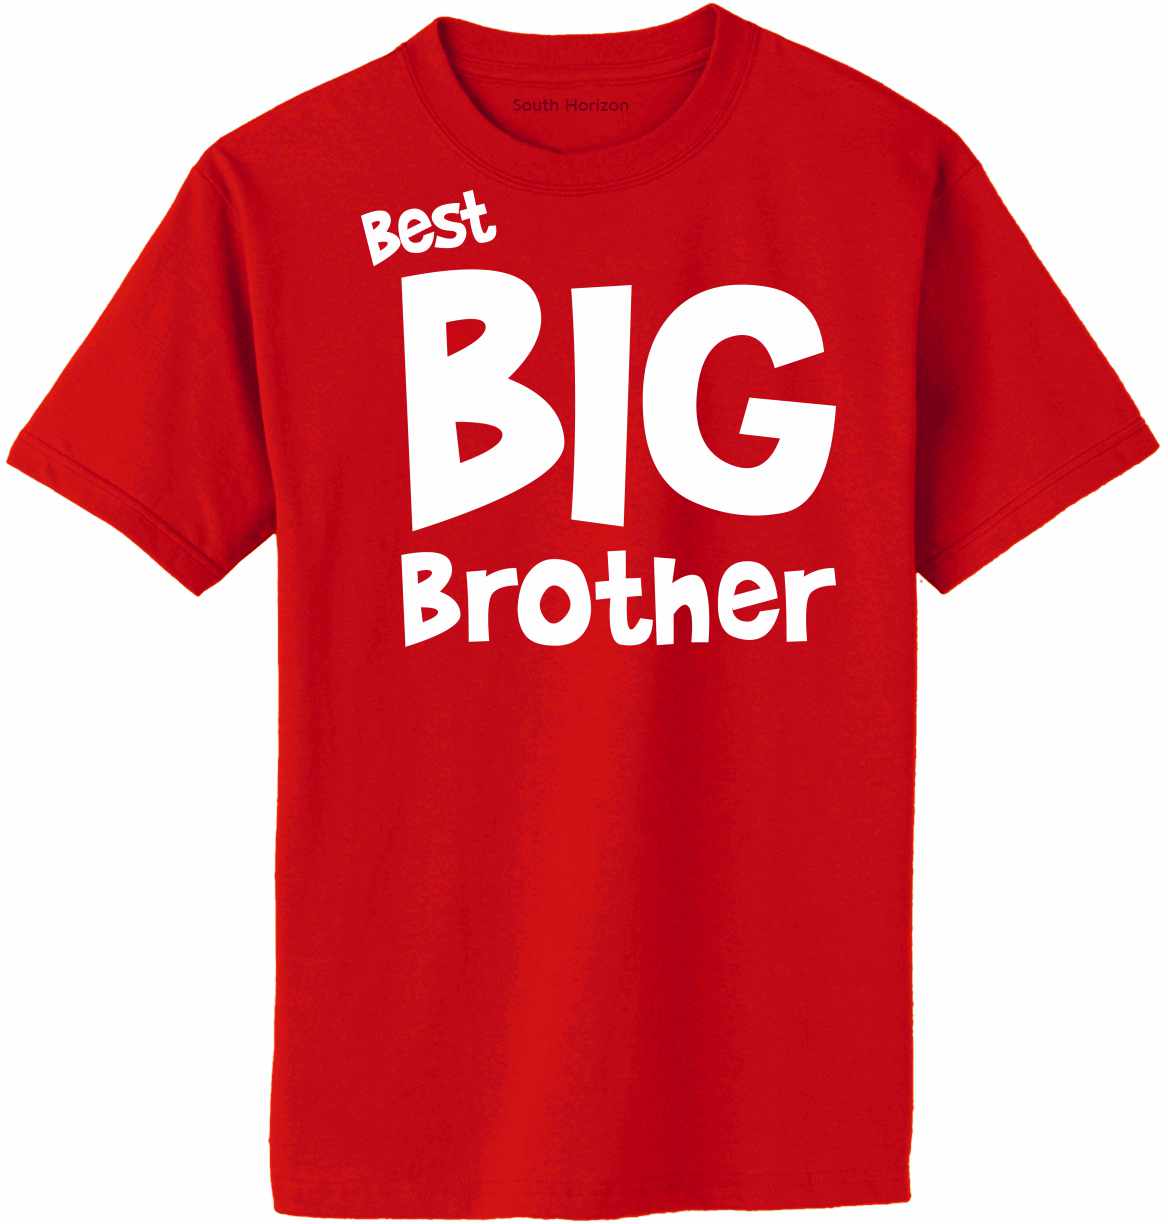 Best Big Brother Adult T-Shirt (#1138-1)